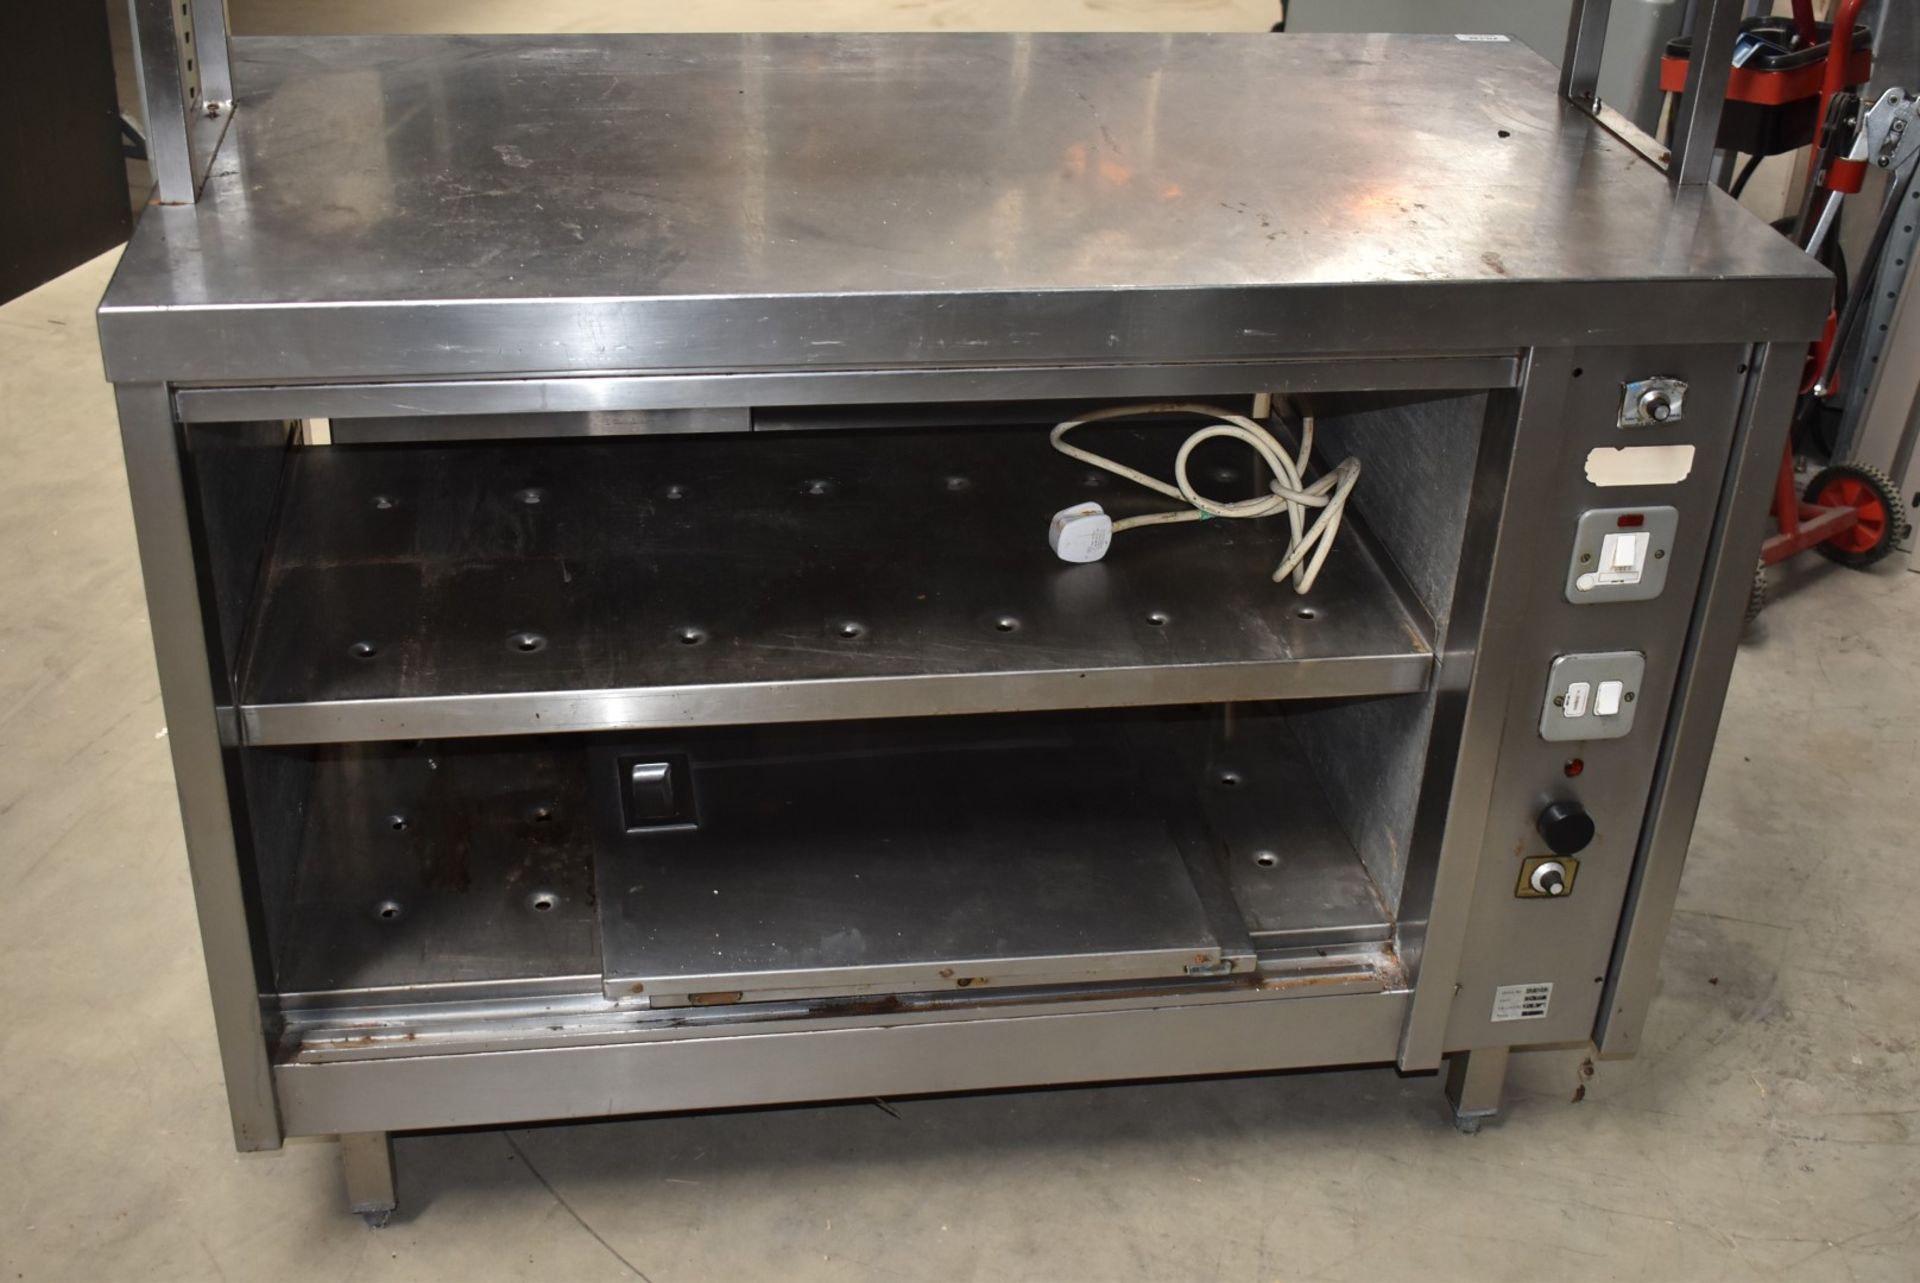 1 x Stainless Steel Hot Cabinet With Overhead Heated Passthrough Shelves and Order Ticket Rail - Image 5 of 11